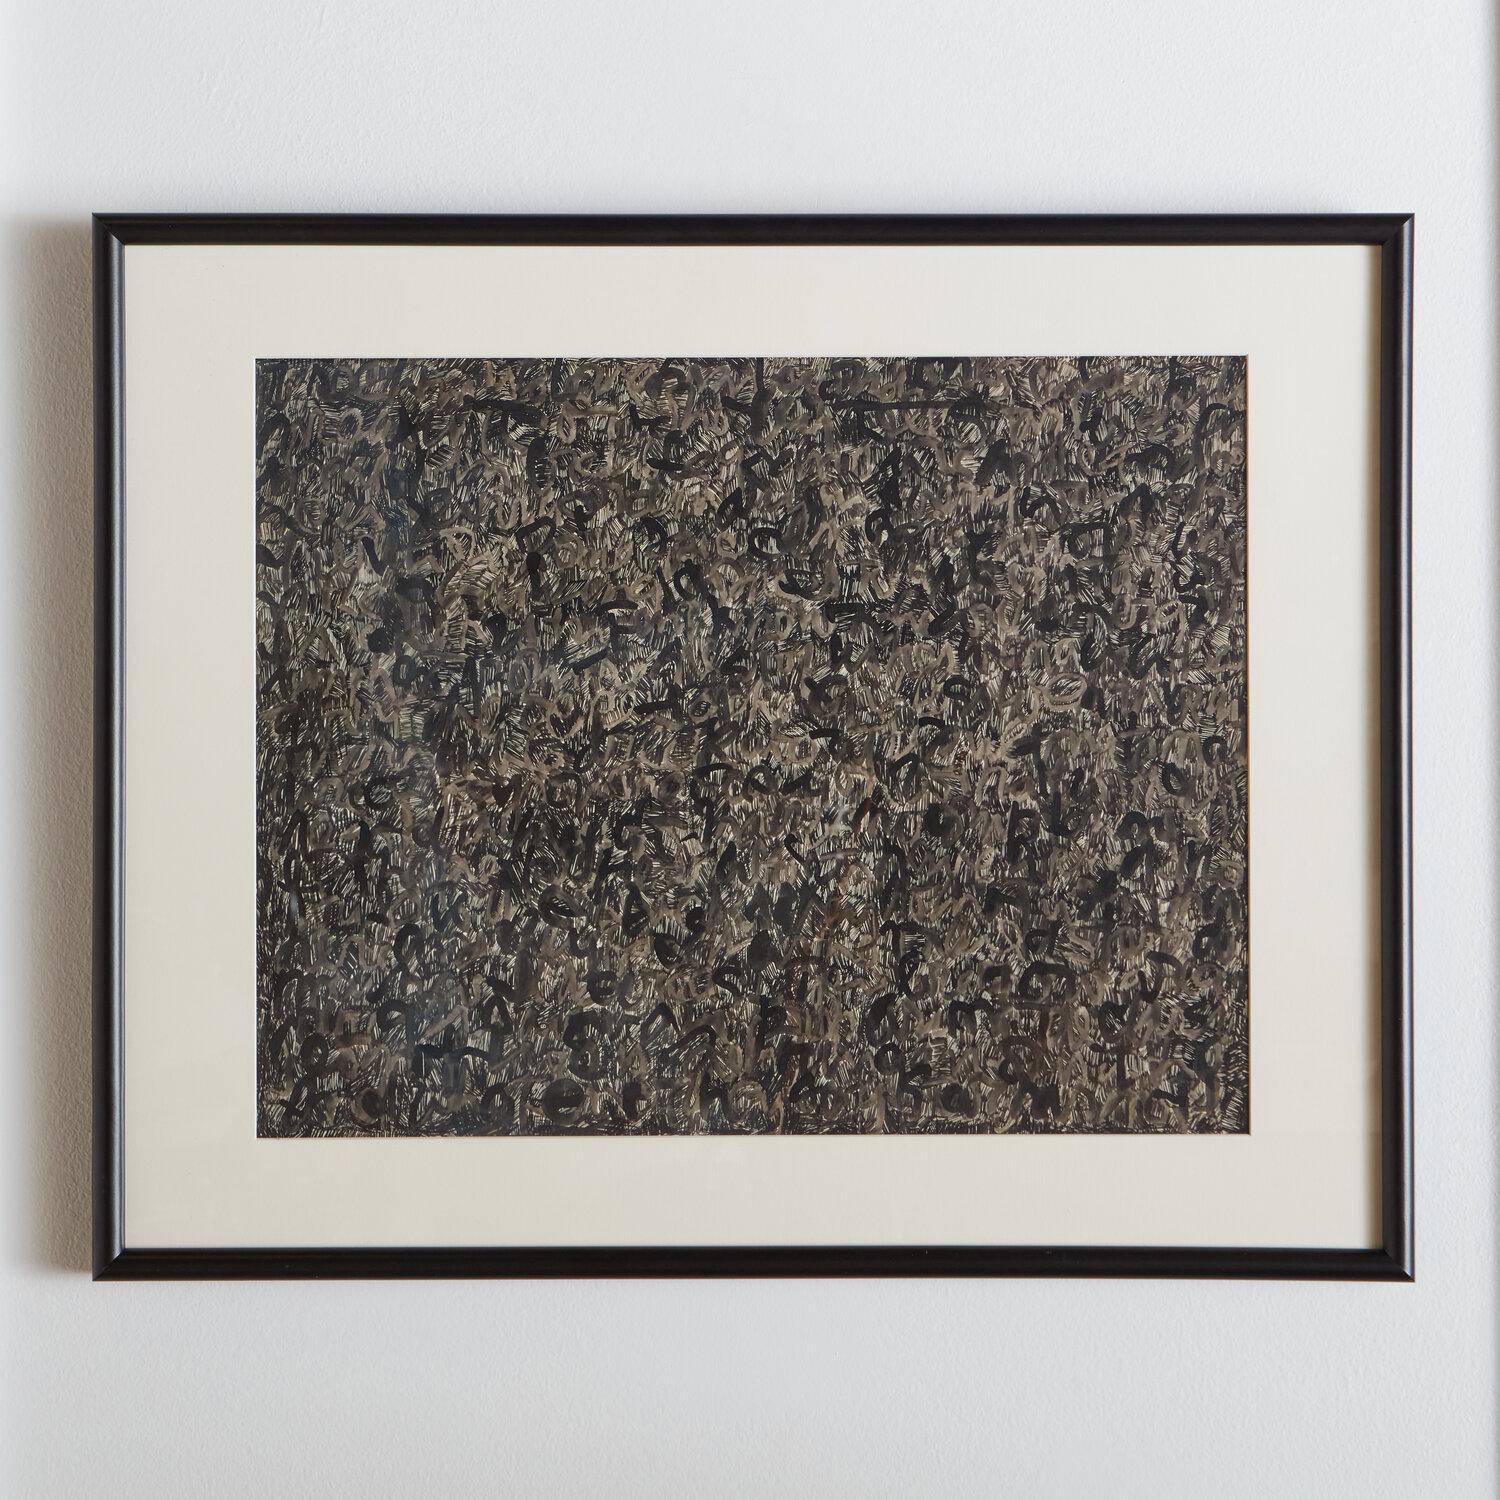 A mixed media work on paper by Chicago artist Harry Bouras (American, 1931-1990) Titled ‘Hex 1’ and dated 1963. This is presented in a black frame.

Harry Bouras was an internationally known artist, critic, teacher, and host of a weekly Chicago